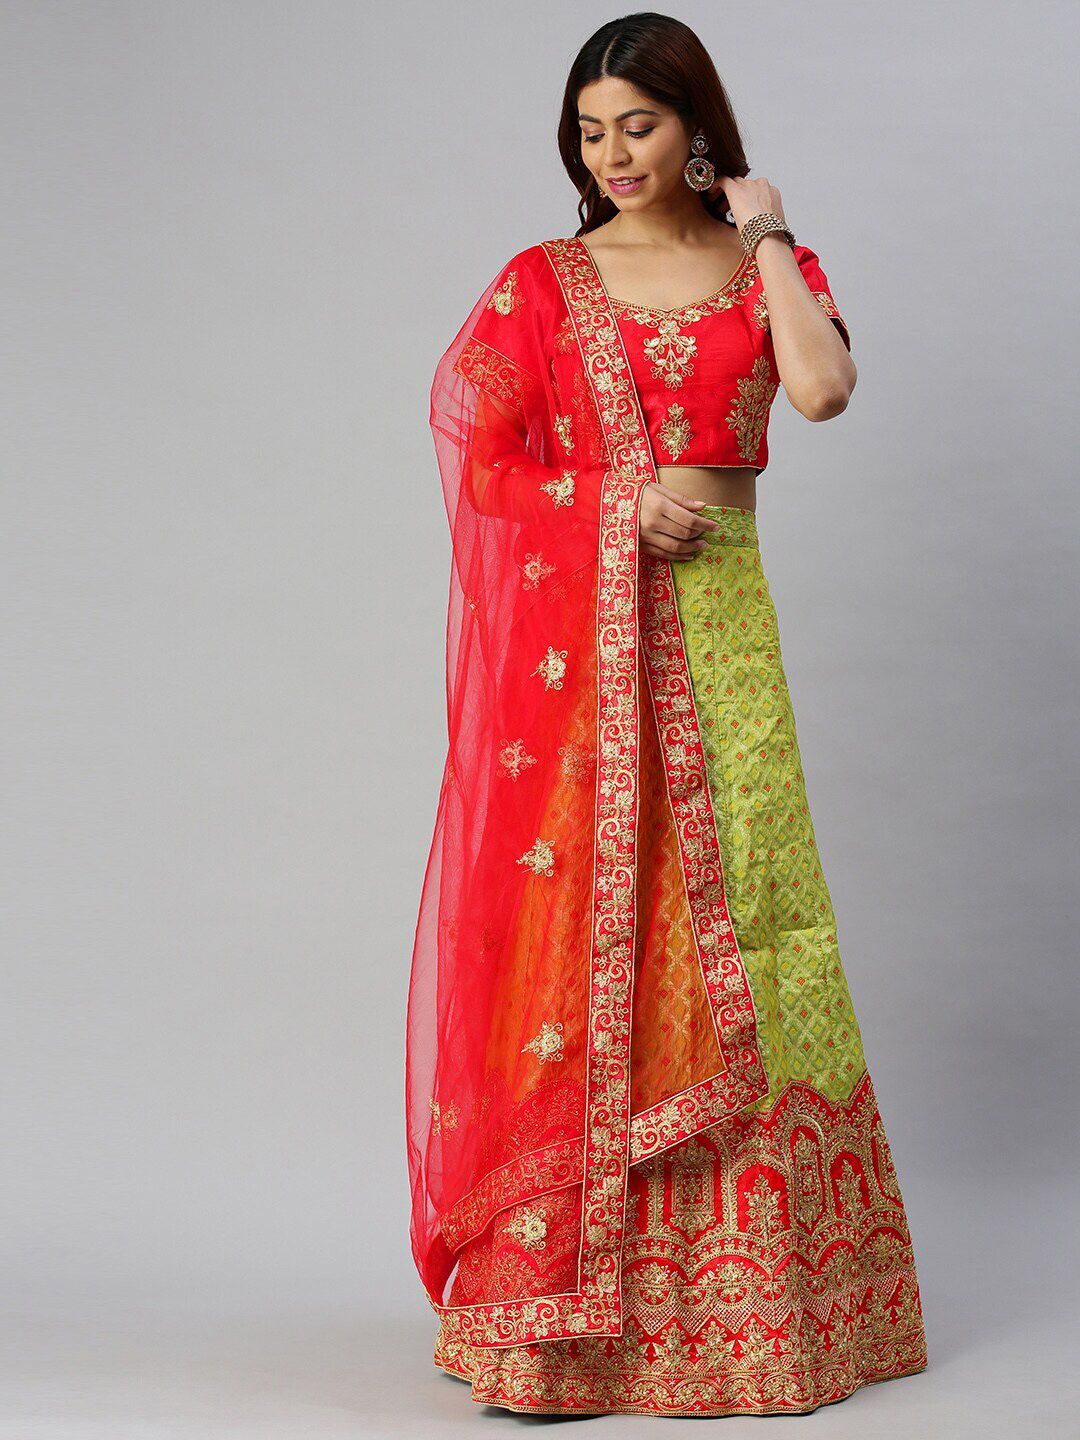 SHADOW & SAINING Green & Red Embroidered Semi-Stitched Lehenga Unstitched Blouse With Dupatta Price in India